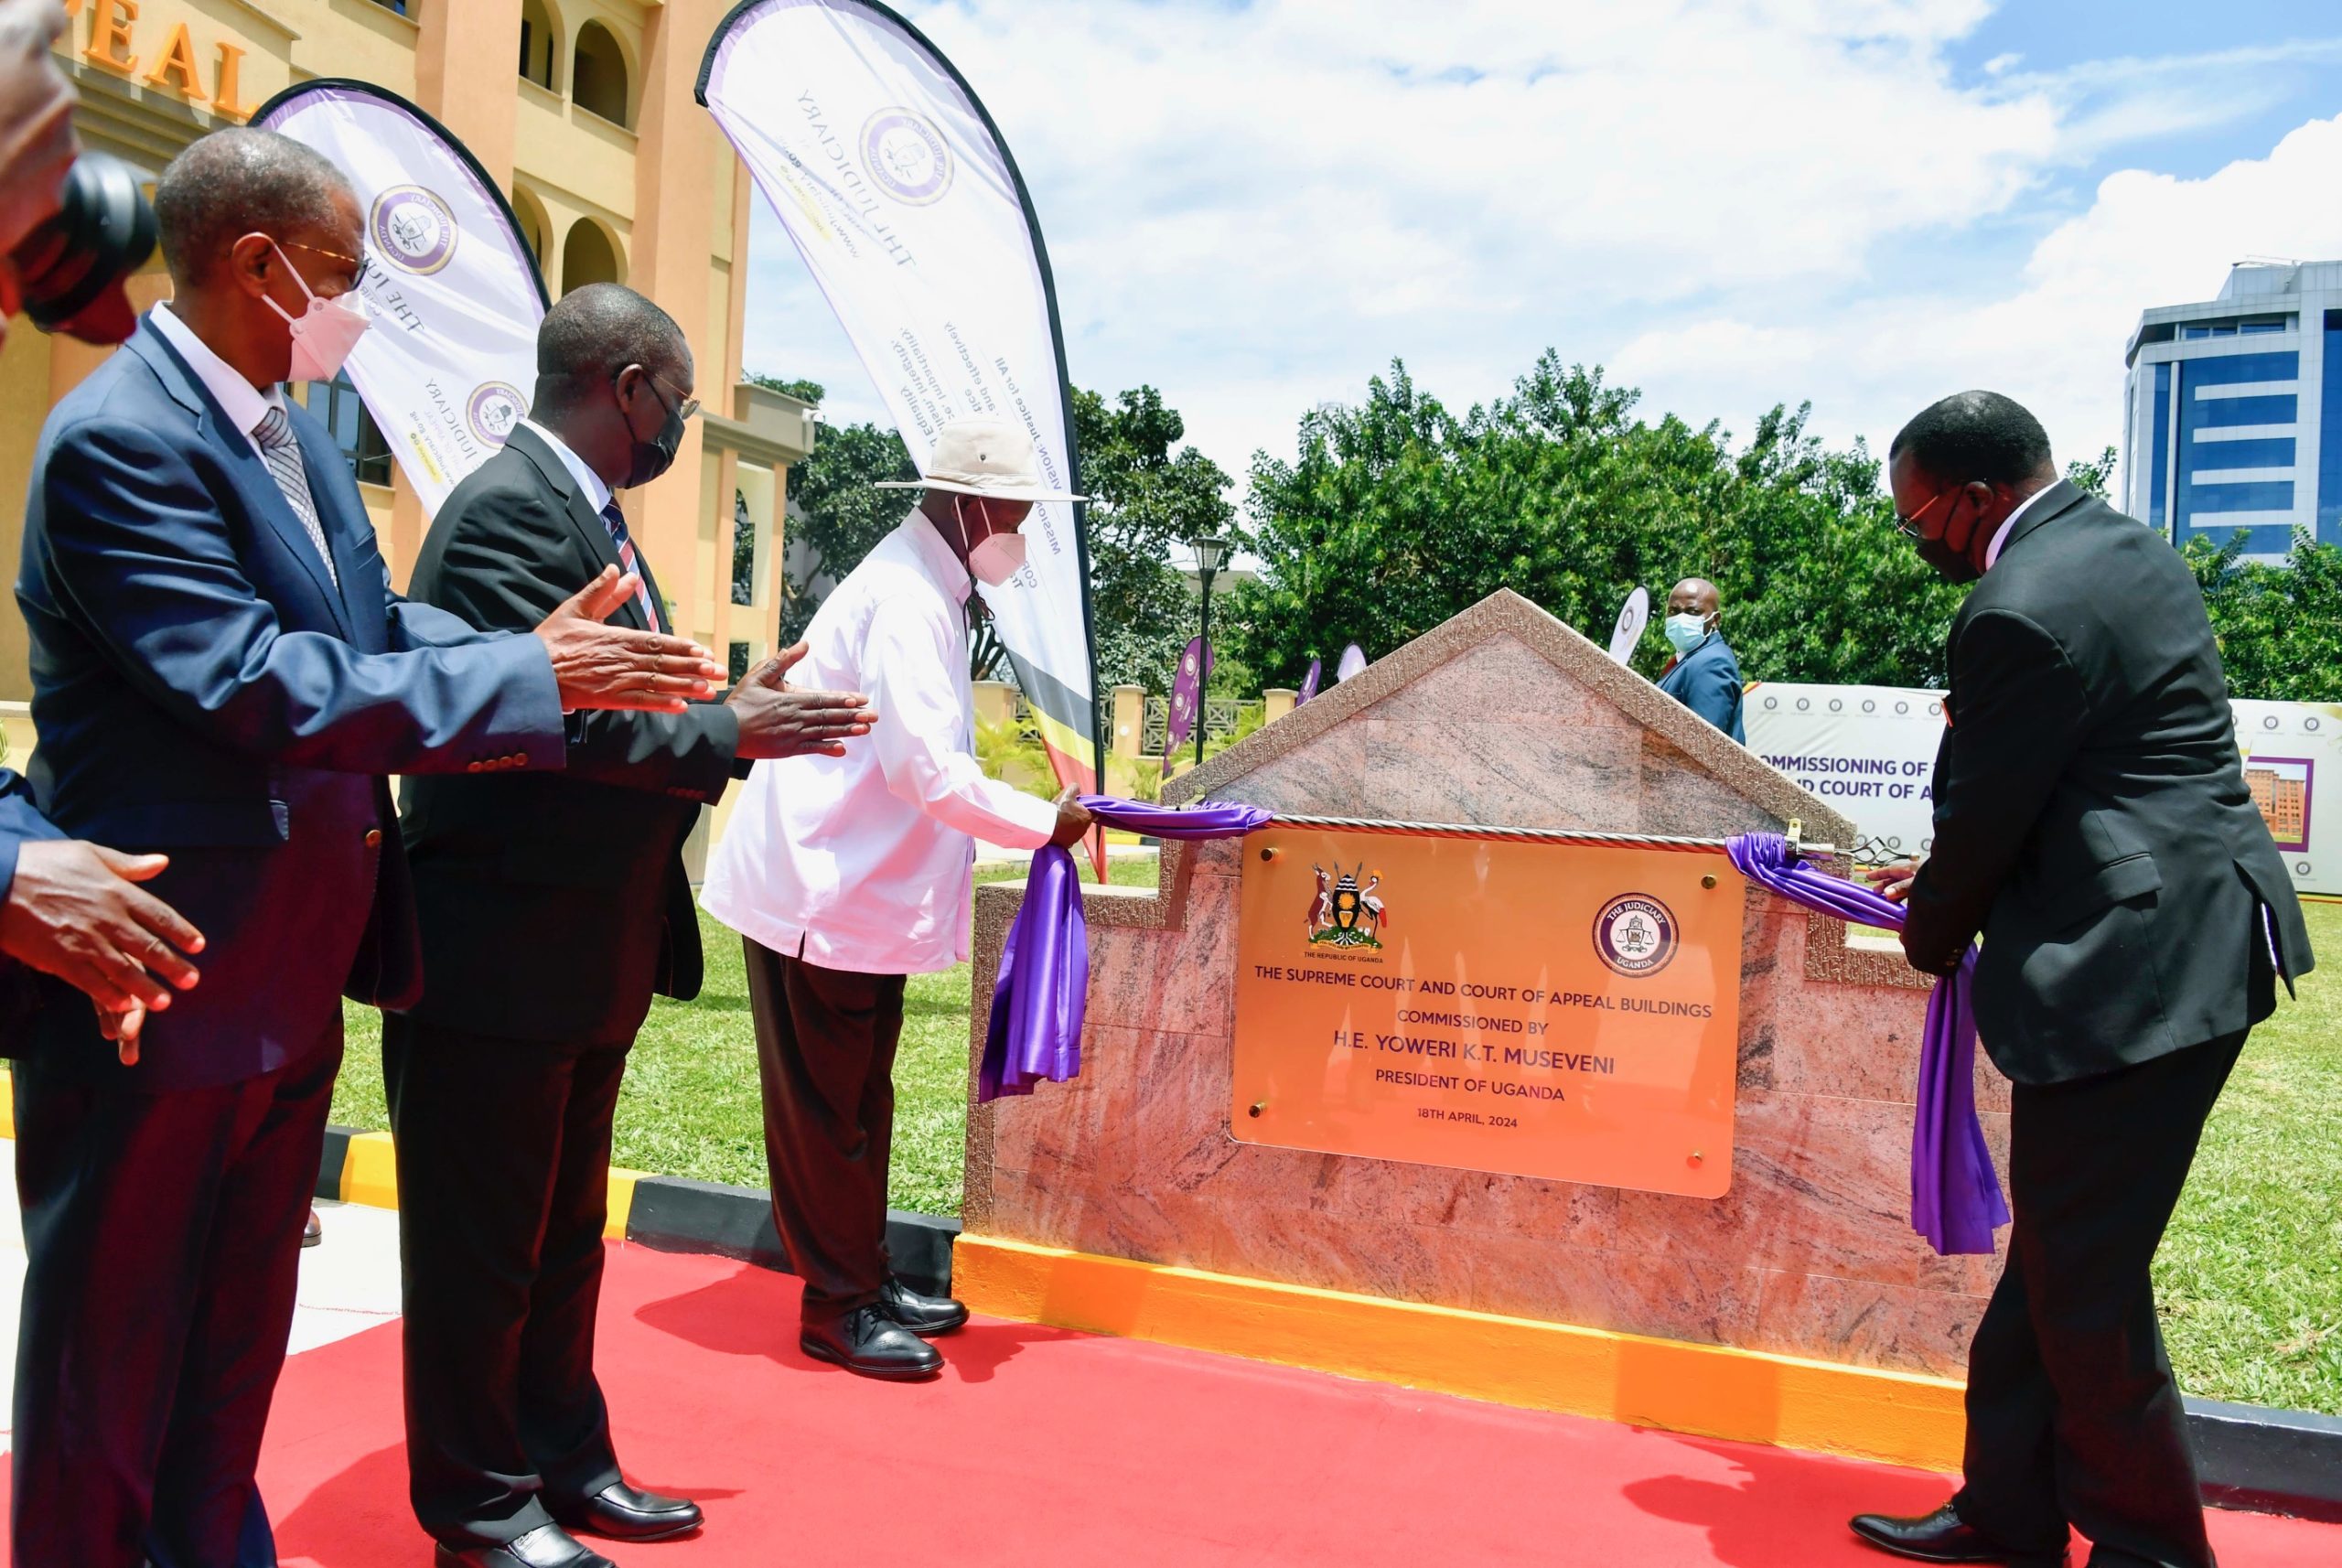 President Museveni Commissions New Supreme Court and Court of Appeal Buildings